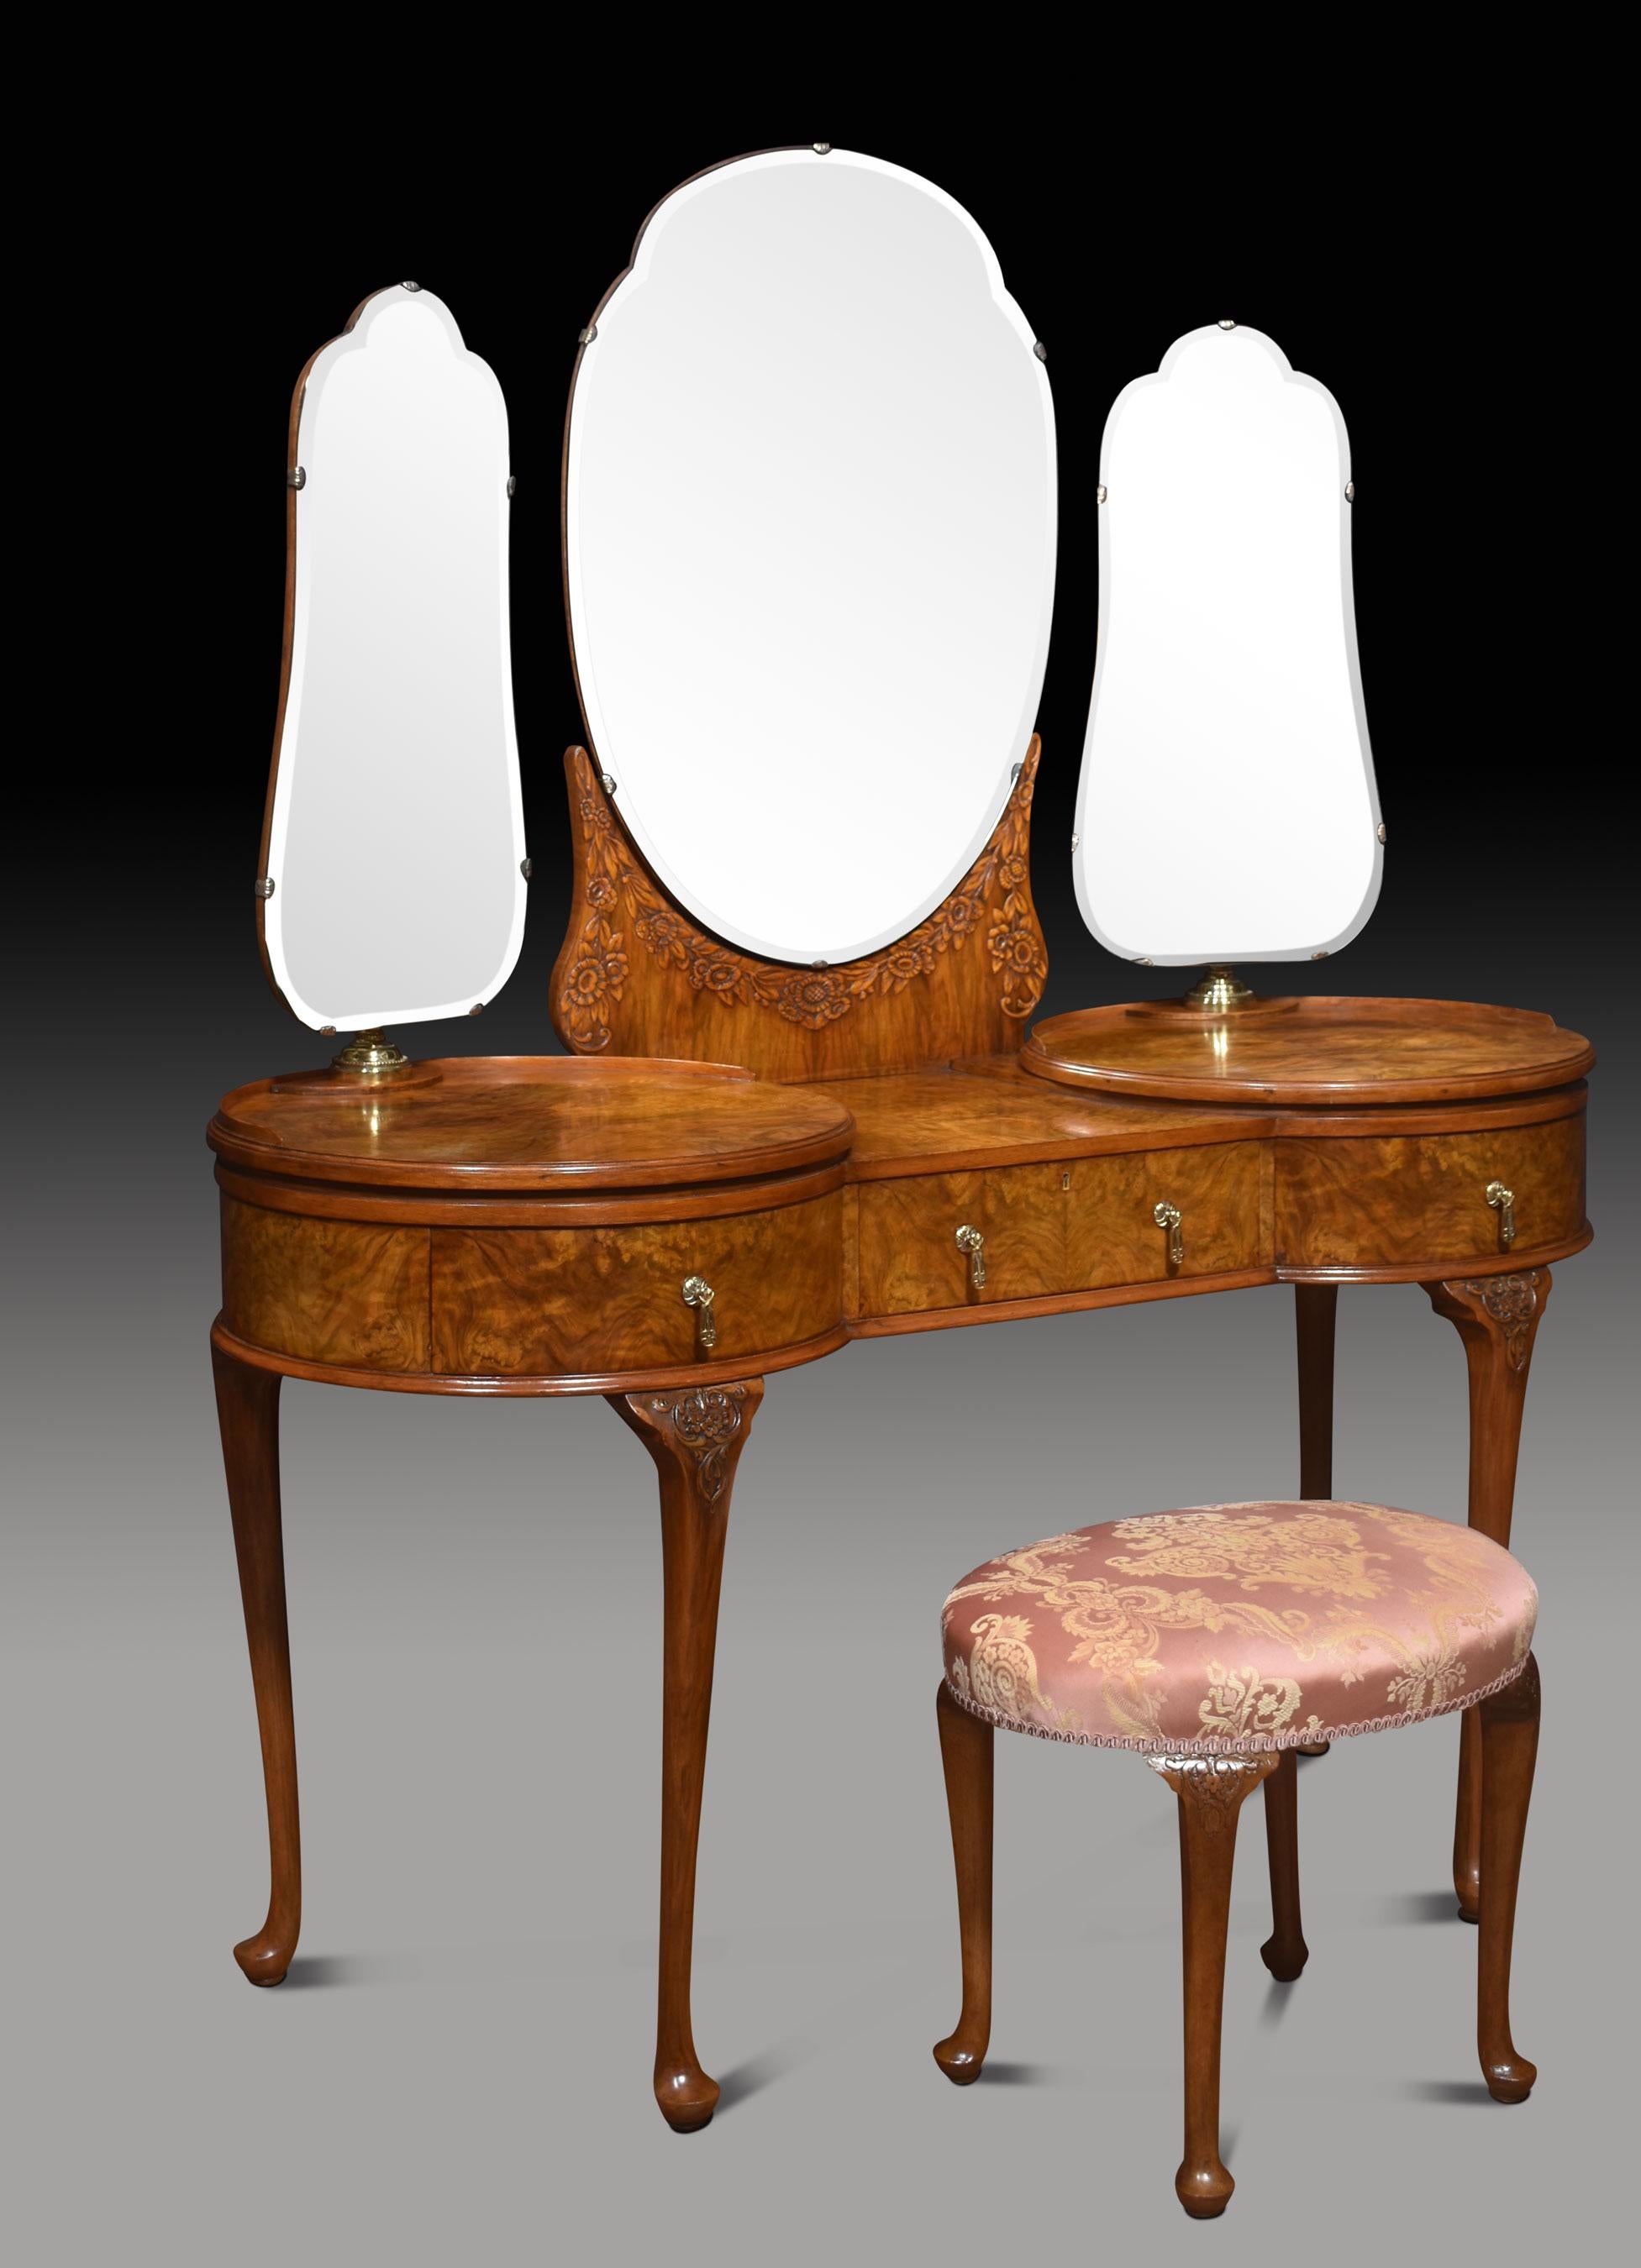 Walnut dressing table. The large central circular bevelled mirror is raised on a carved superstructure. Flanked by unusual side mirrors which have swivel action and can rotate fully. The large shaped walnut top to the freeze is fitted with three